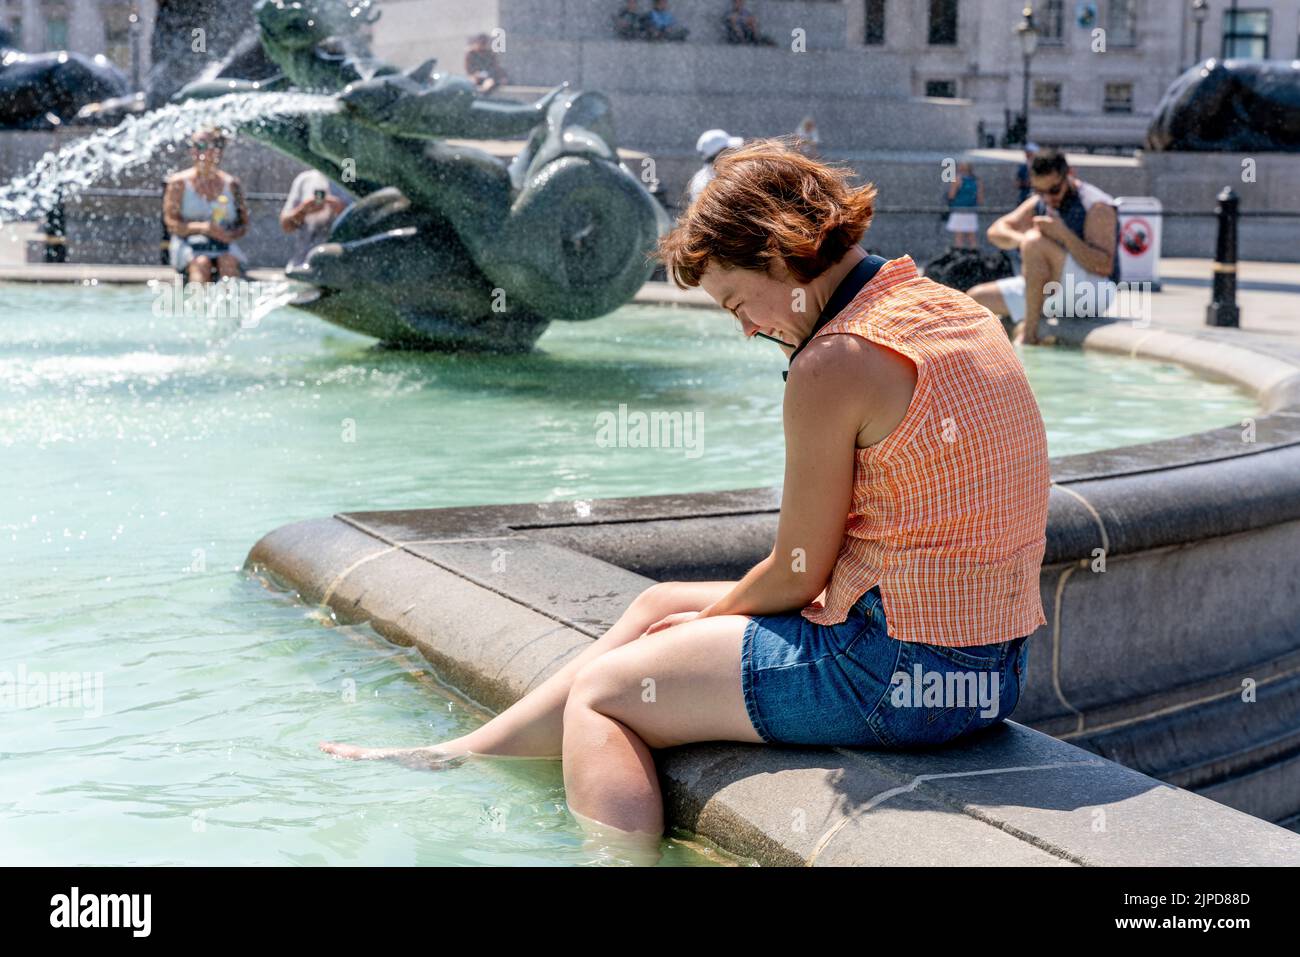 A Young Woman Cools Off In The Fountains In Trafalgar Square On The Hottest Day Ever Recorded, London, UK Stock Photo